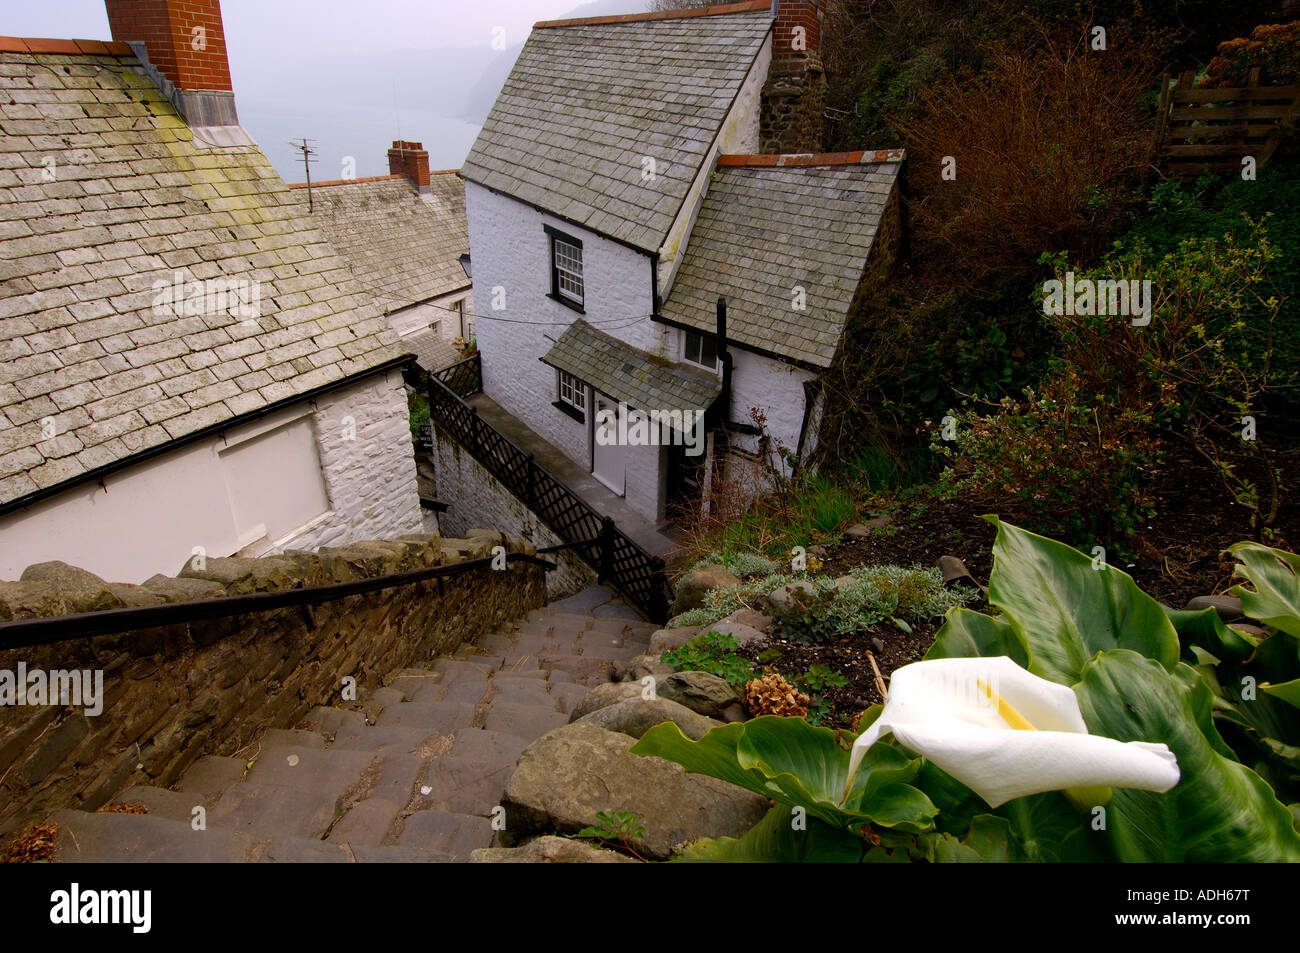 A street in Clovelly looking down the steep ancient stone steps with quirky old buildings and a white lily in the foreground Stock Photo